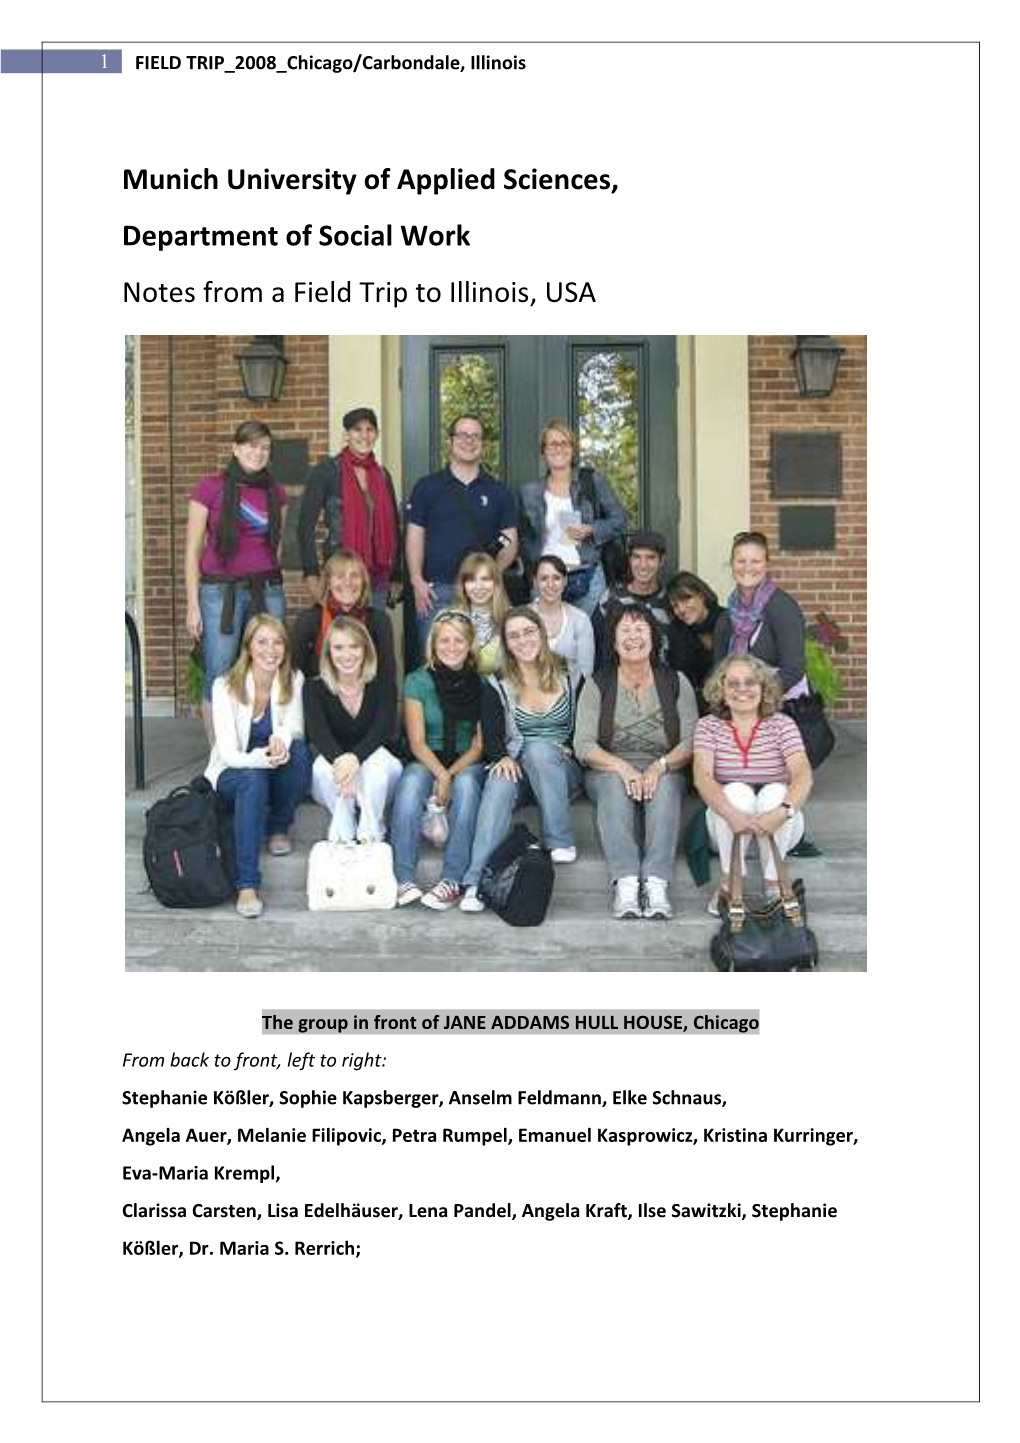 Munich University of Applied Sciences, Department of Social Work Notes from a Field Trip to Illinois, USA